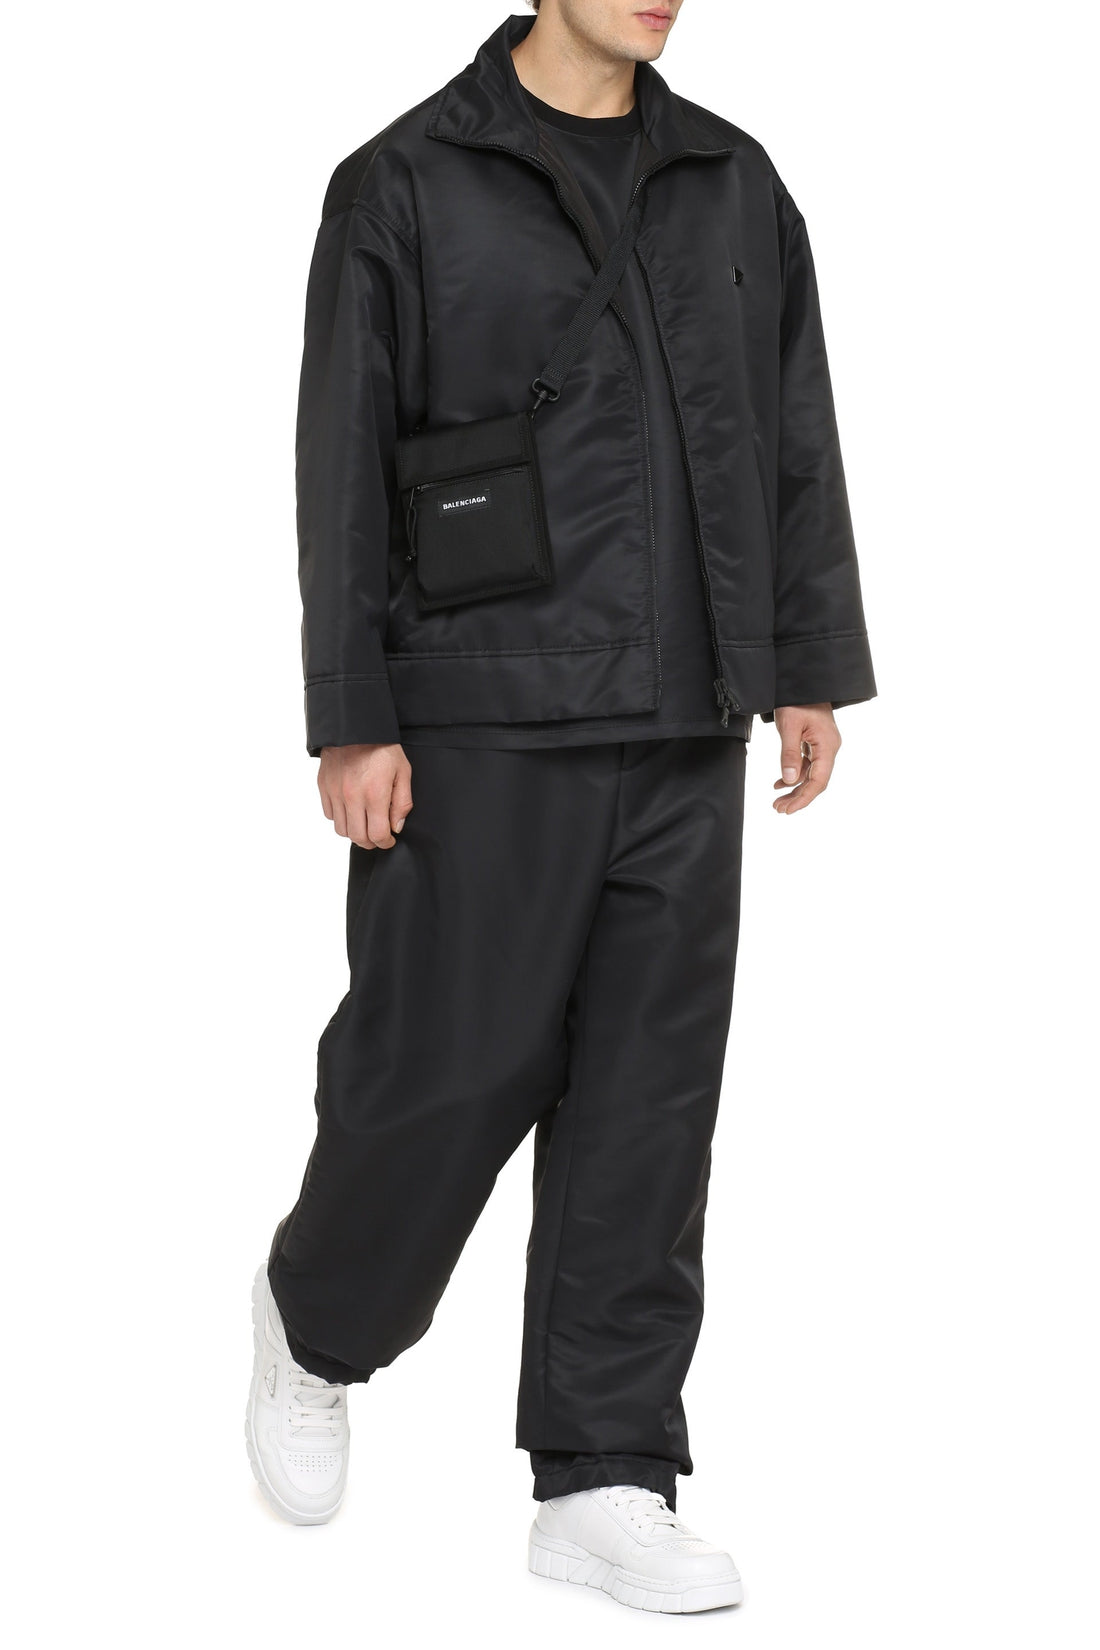 Valentino-OUTLET-SALE-Techno fabric jacket-ARCHIVIST